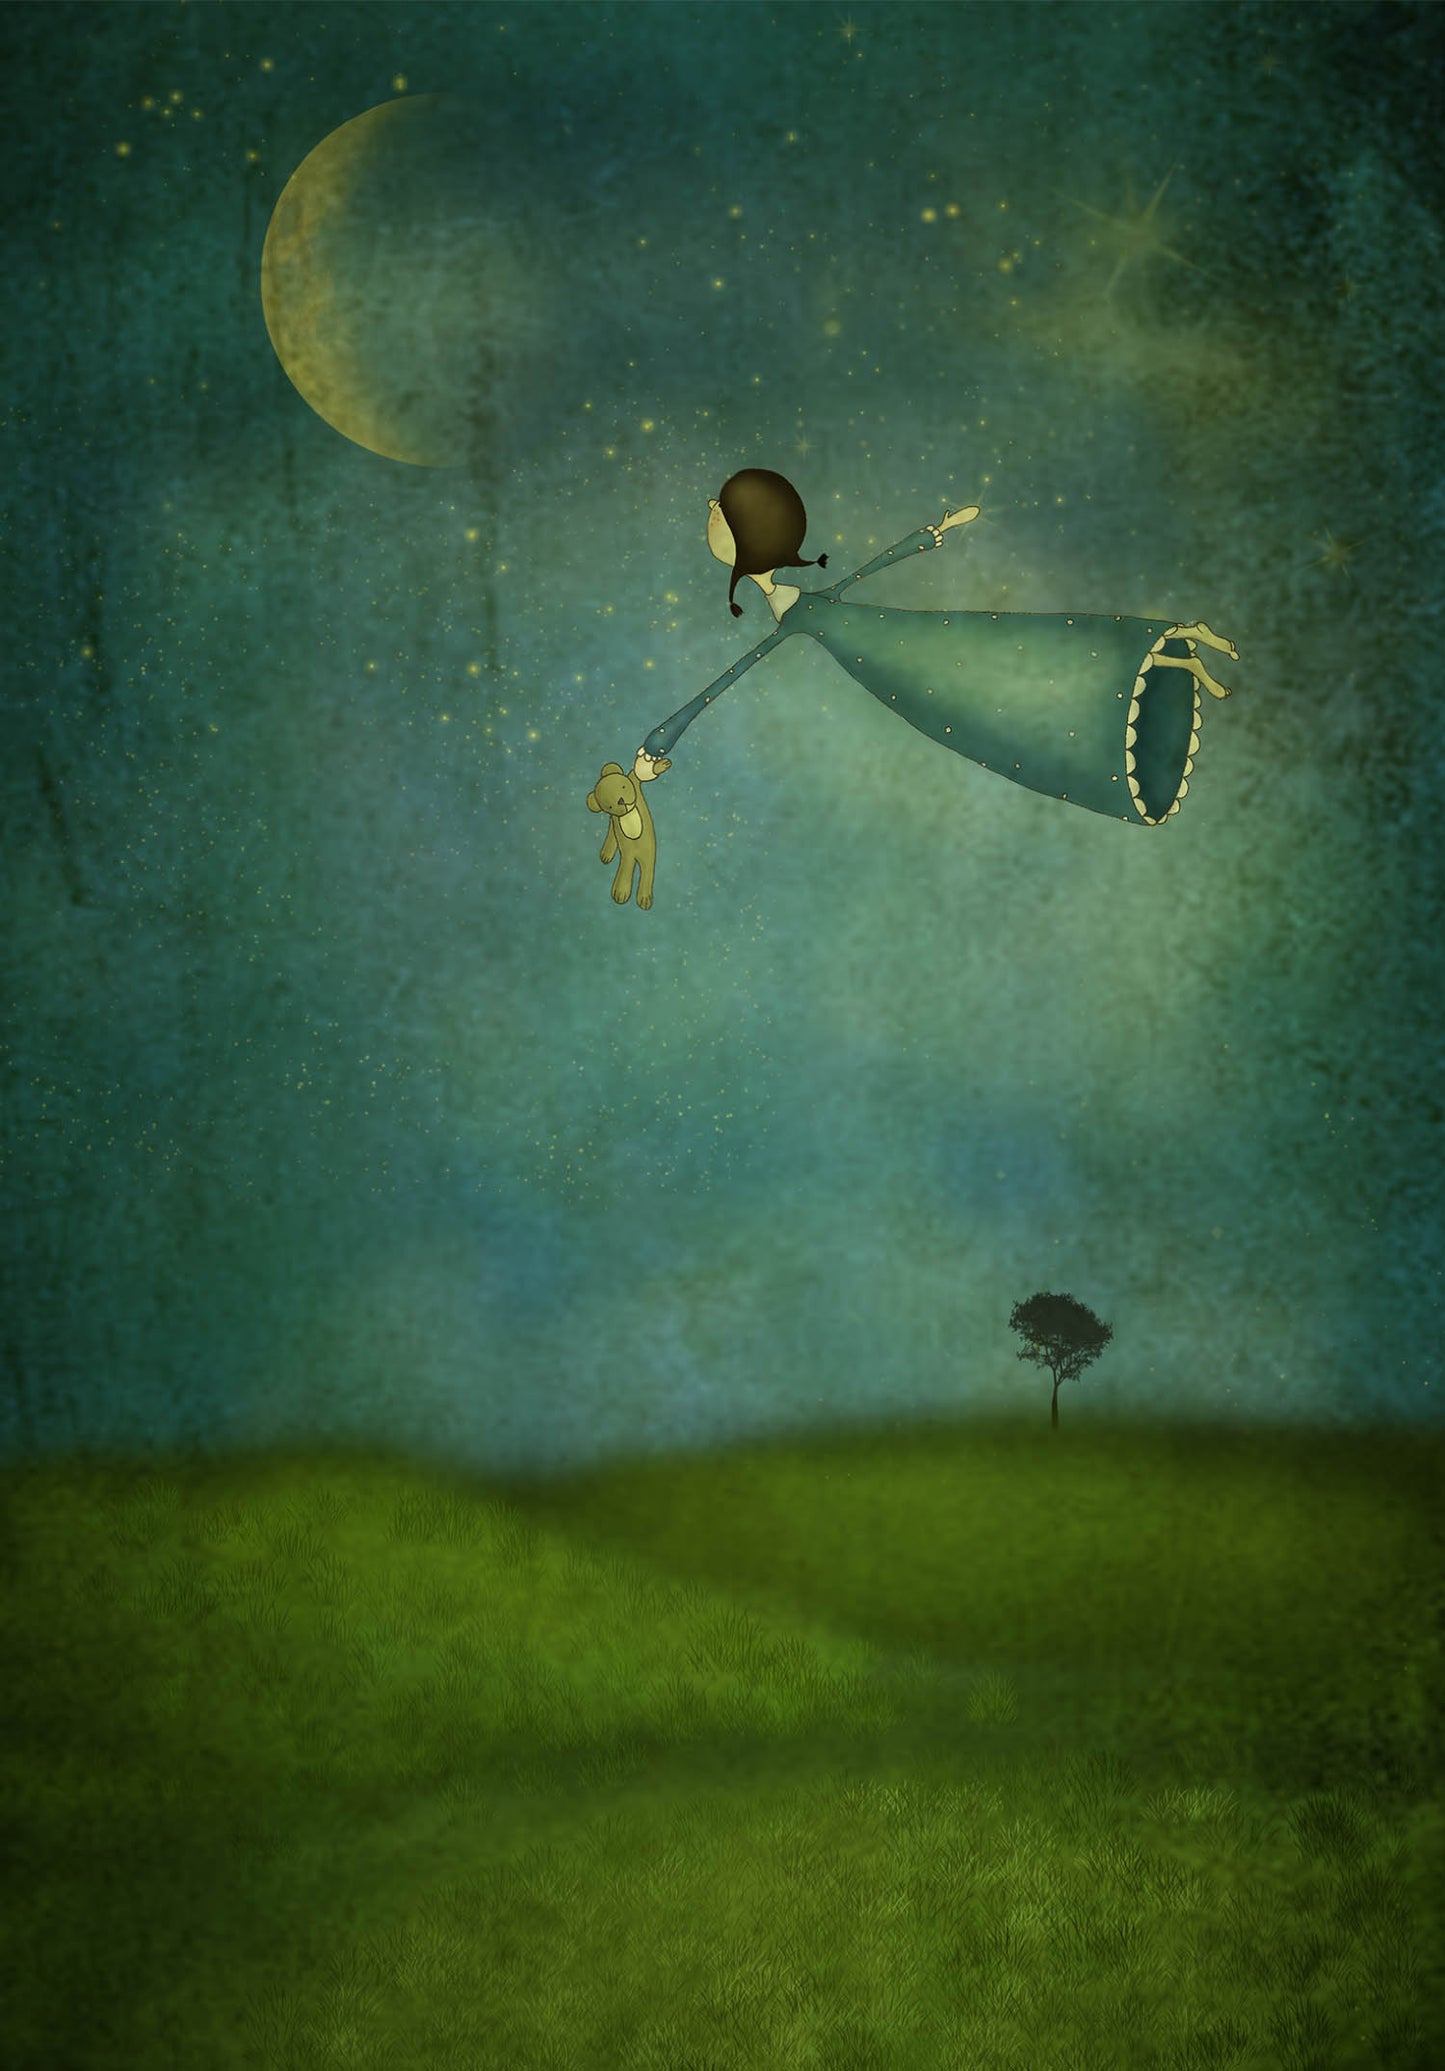 Fly me to the moon - Art print